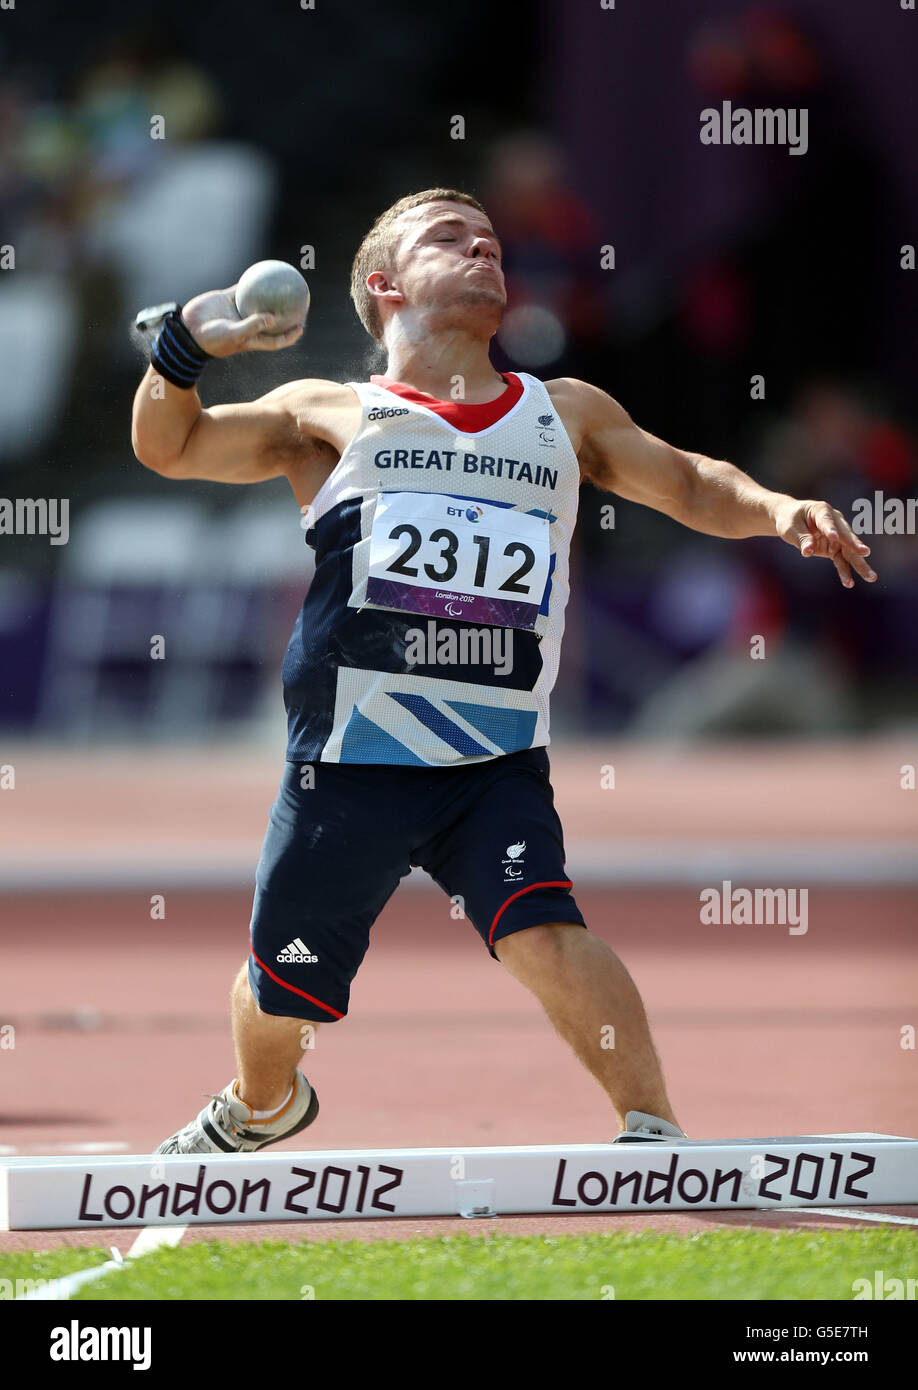 Great Britain's Kyron Duke during the Men's Shot Put F40 category in the Olympic Stadium. Stock Photo